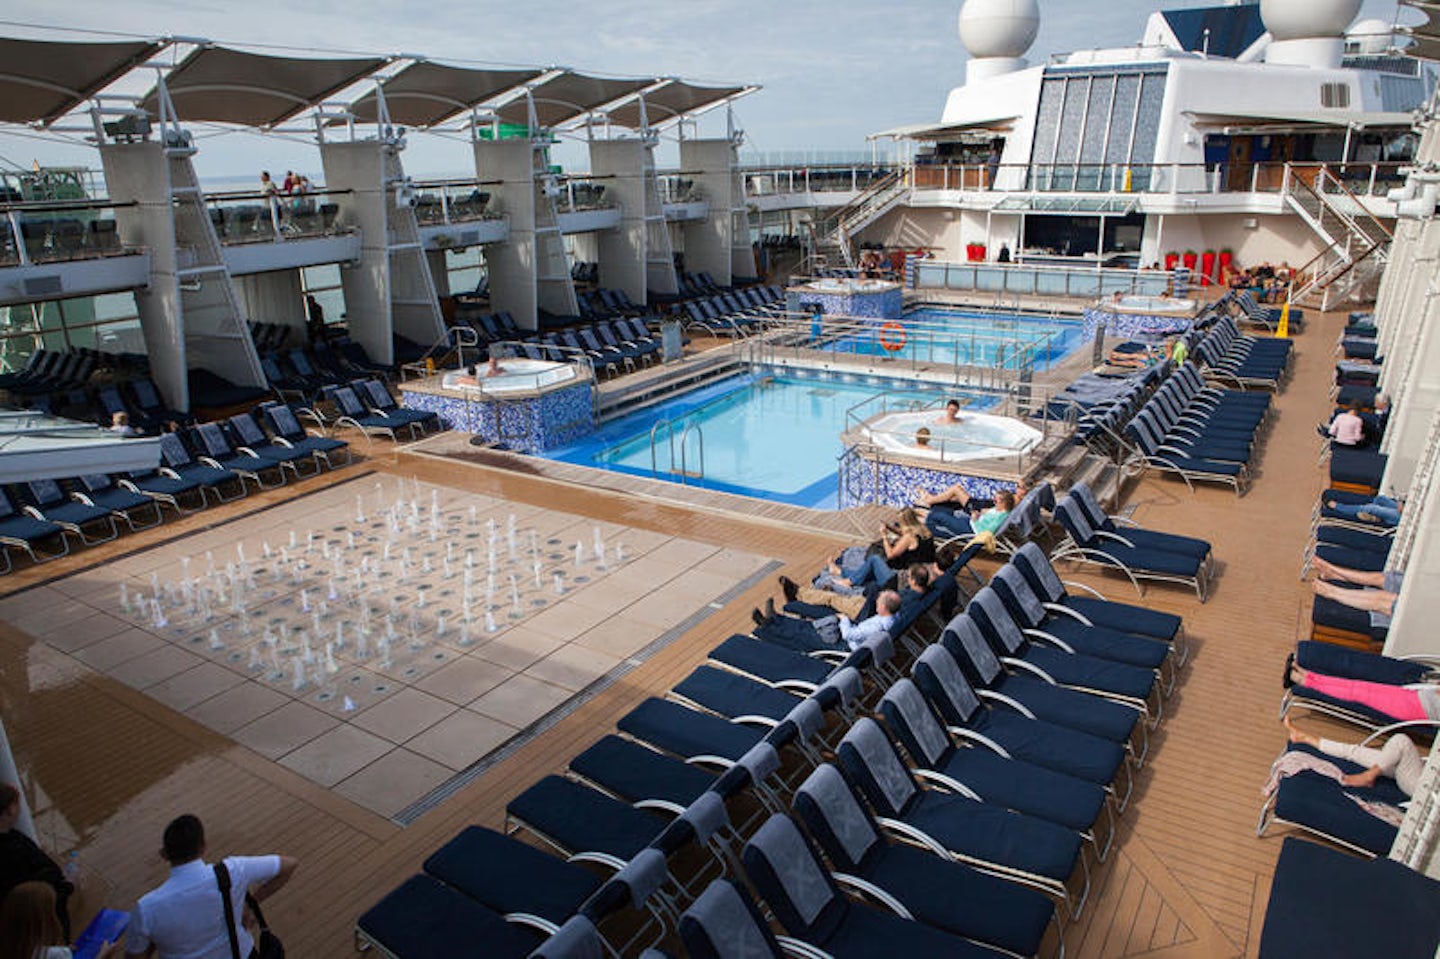 The Pool on Celebrity Eclipse